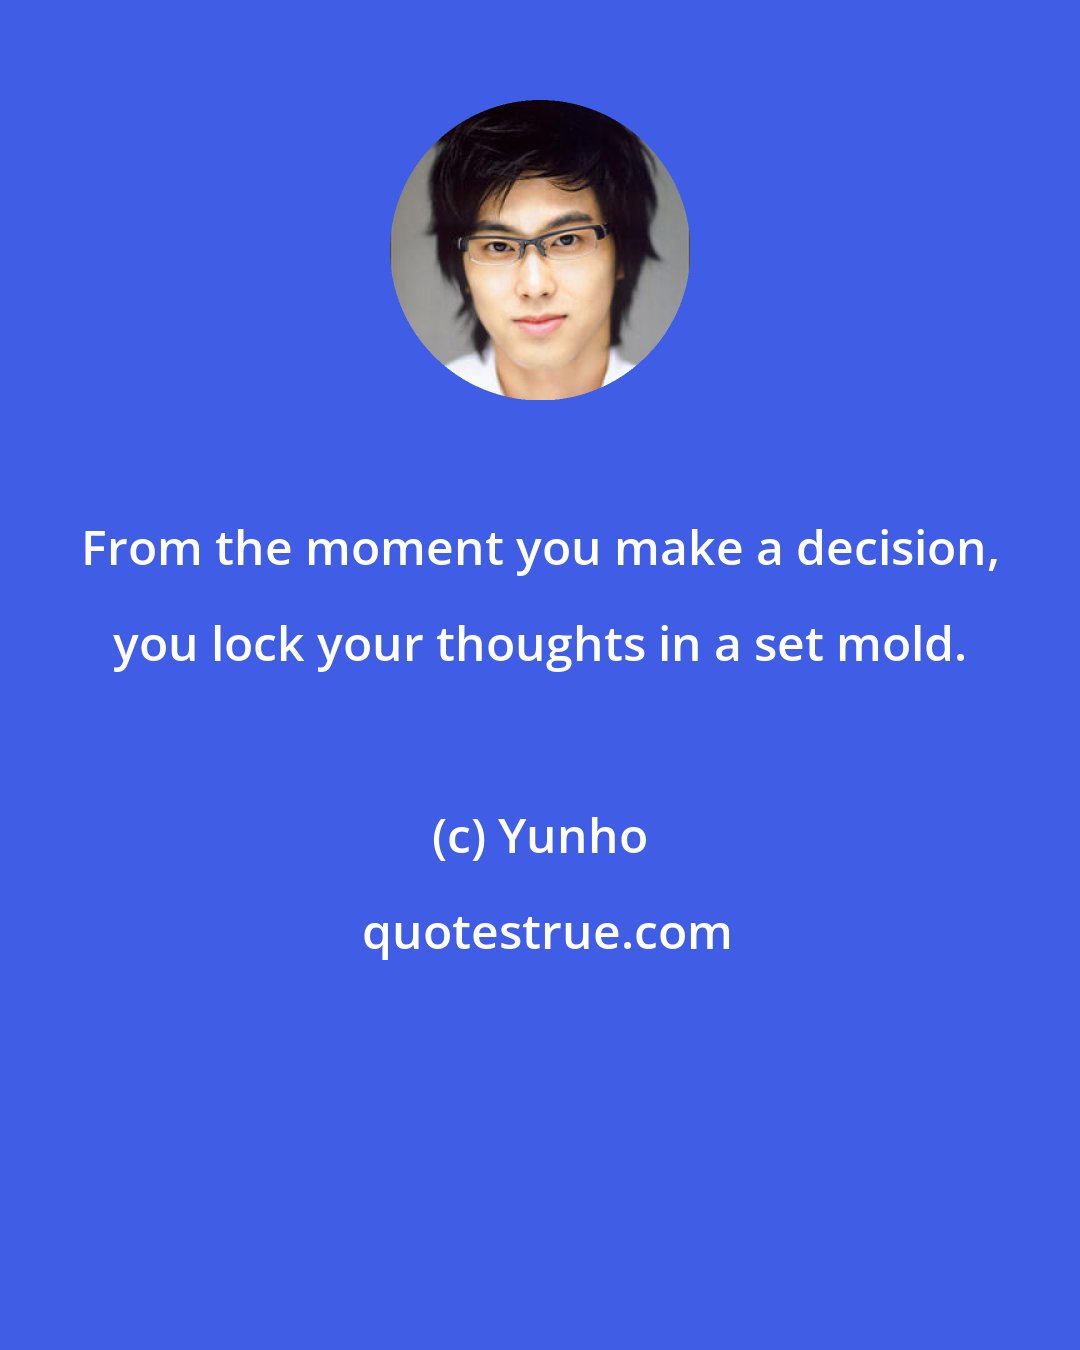 Yunho: From the moment you make a decision, you lock your thoughts in a set mold.